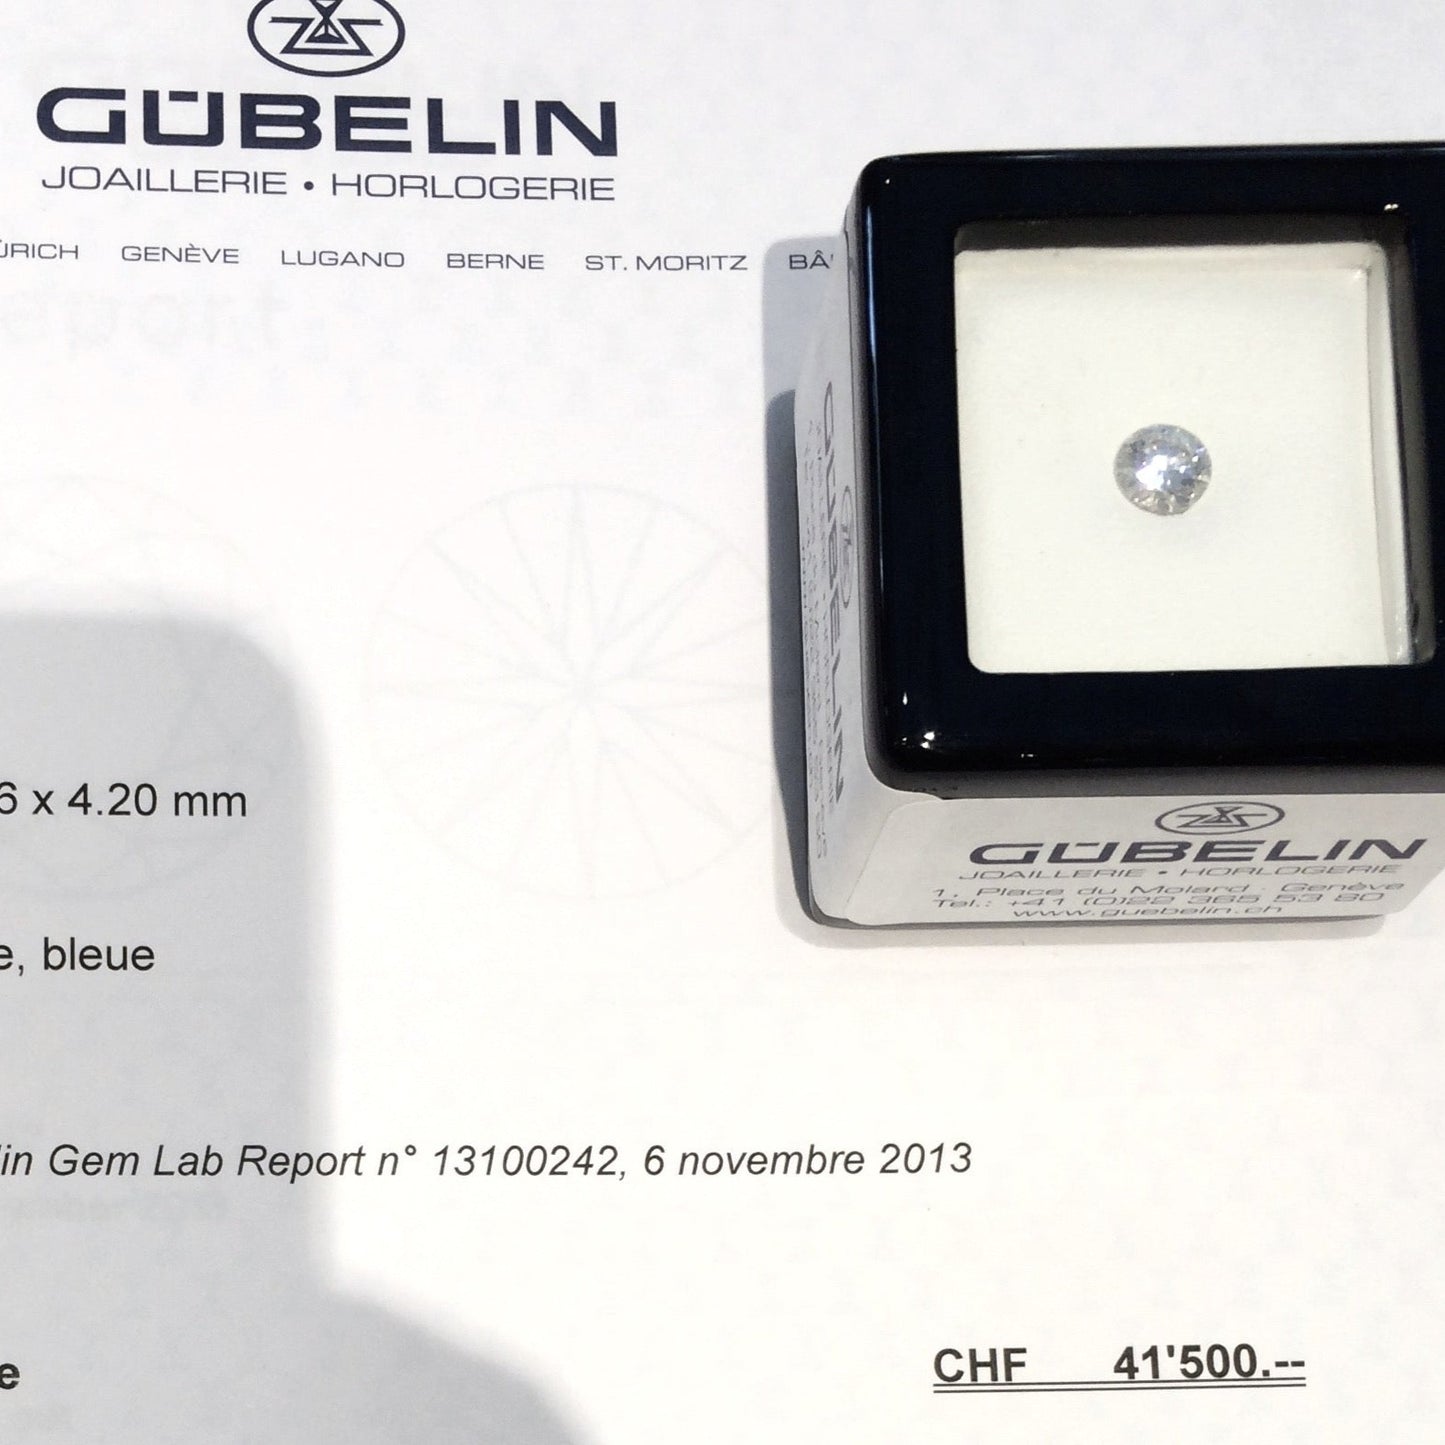 Diamond Solitaire 1.25 ct. D, IF Gubelin certificate & value estimation CHF 41.500.-